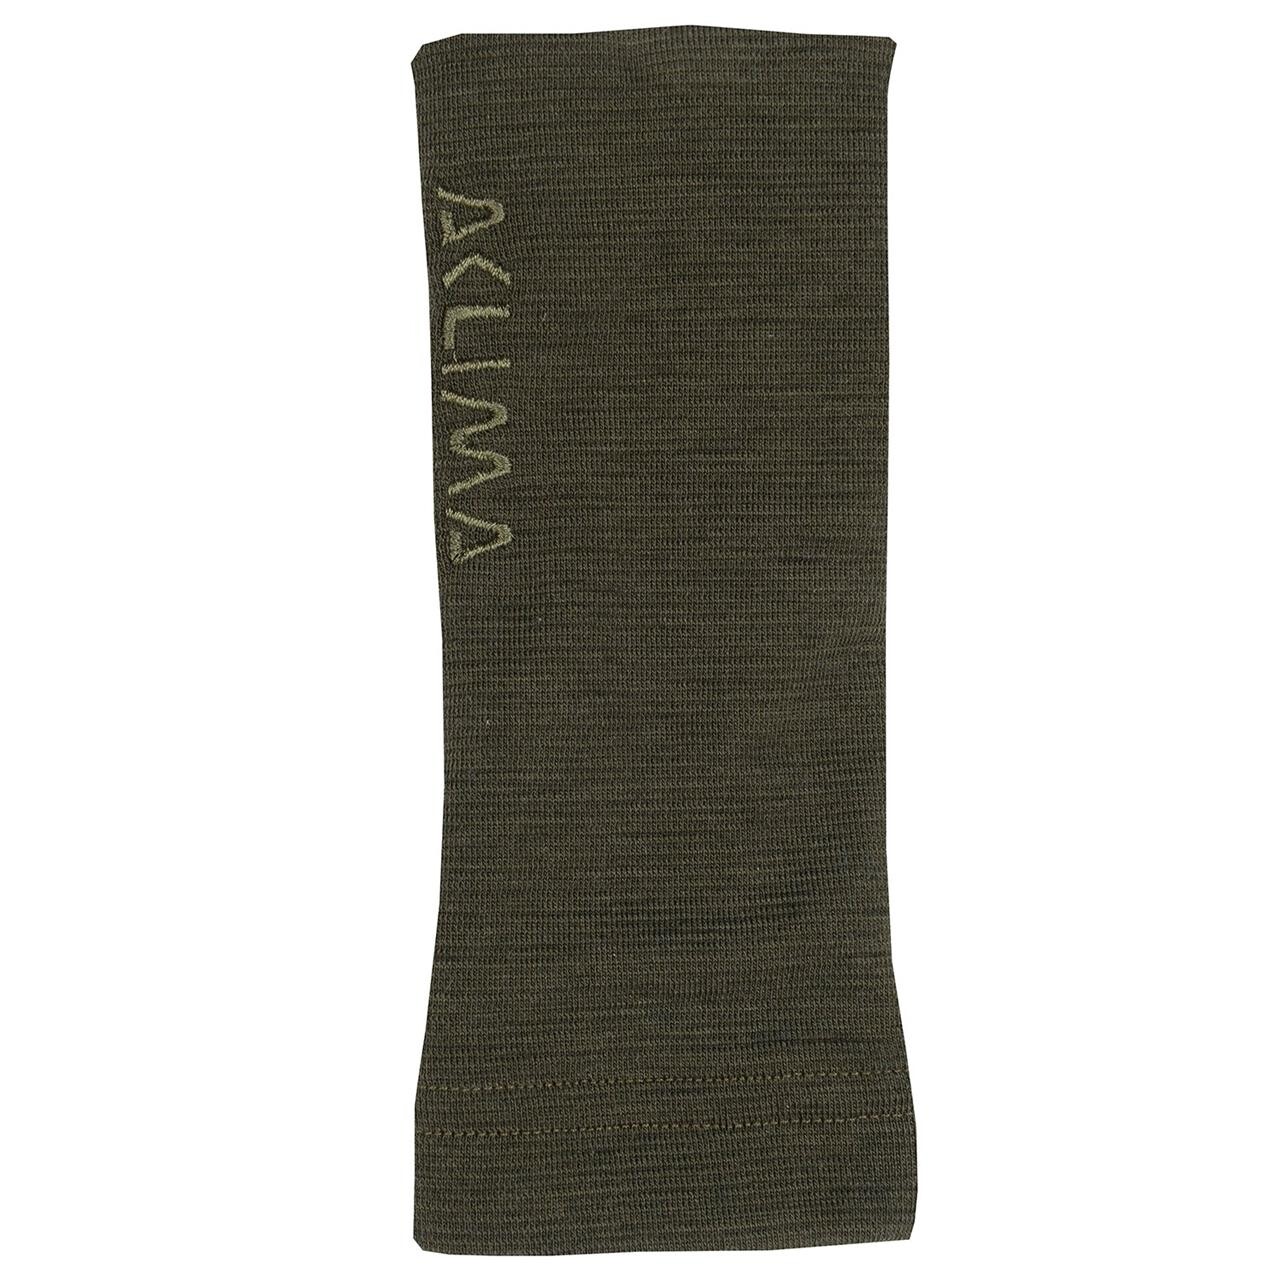 Aclima Warmwool Pulseheater (Grøn (OLIVE NIGHT) One size)